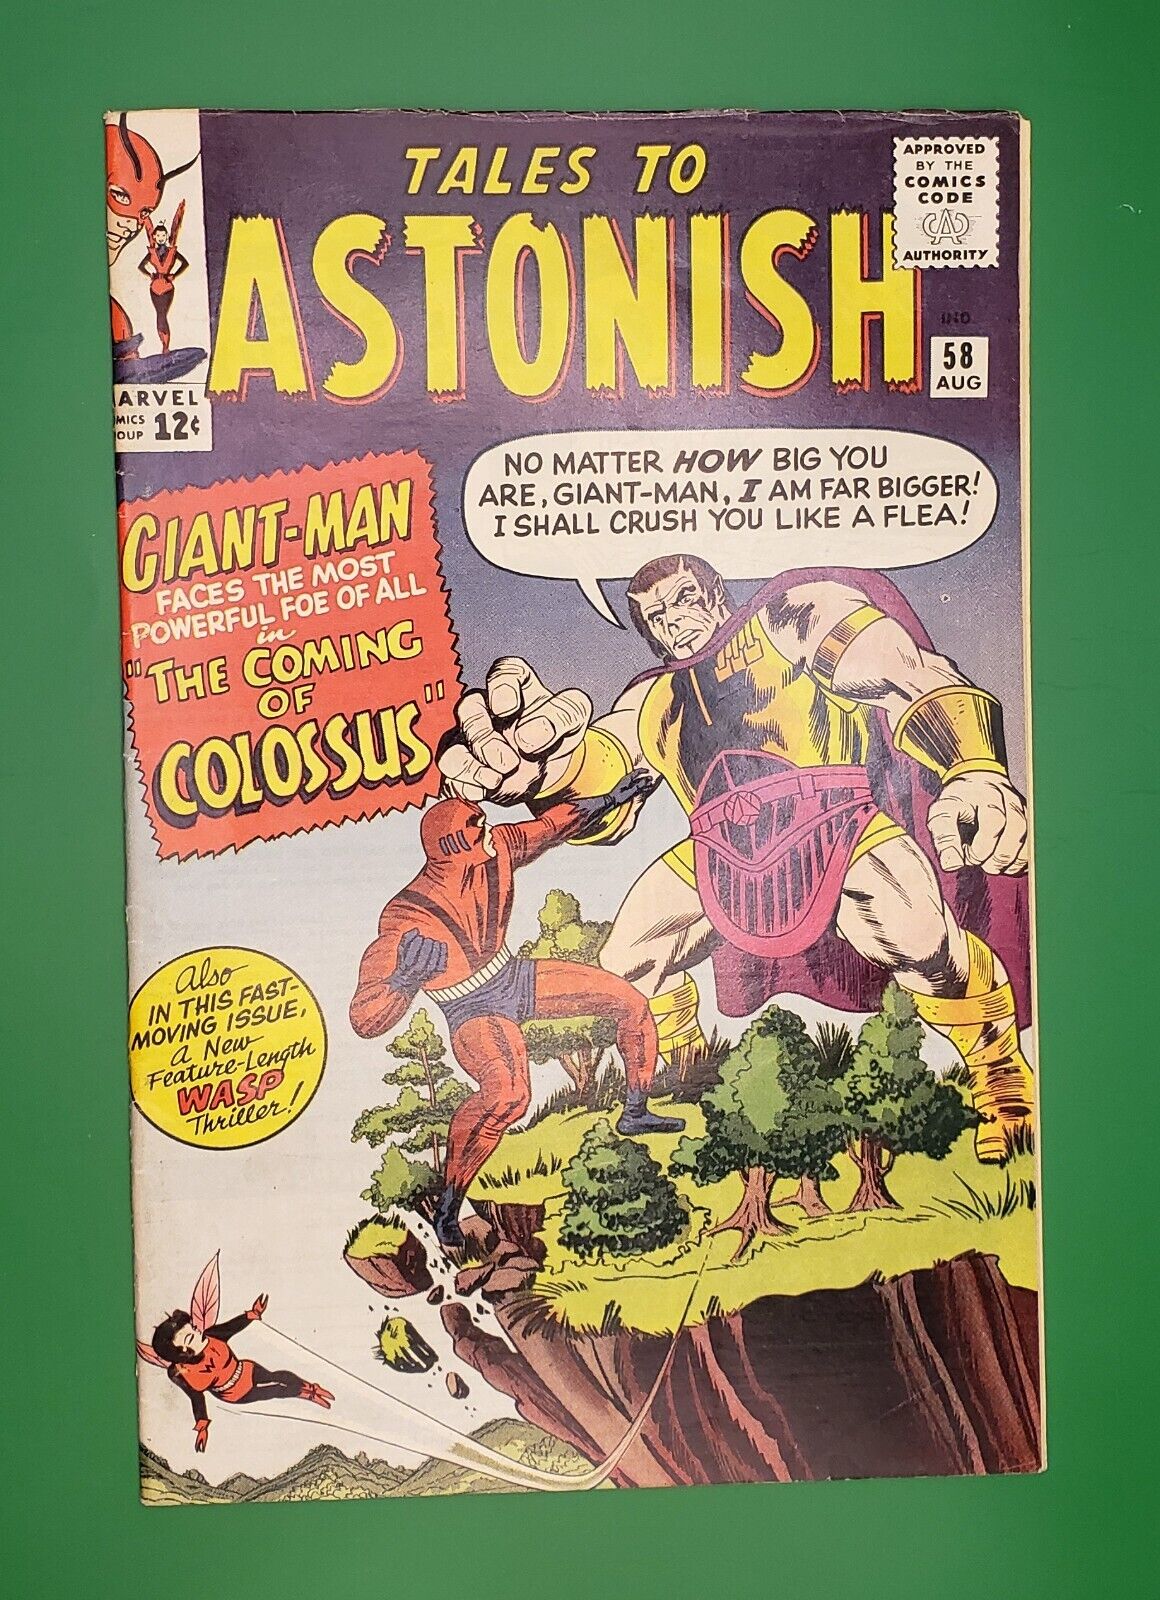 Tales to Astonish #58 Colossus Larry Lieber Jack Kirby Stan Lee 1964 VG+/FN